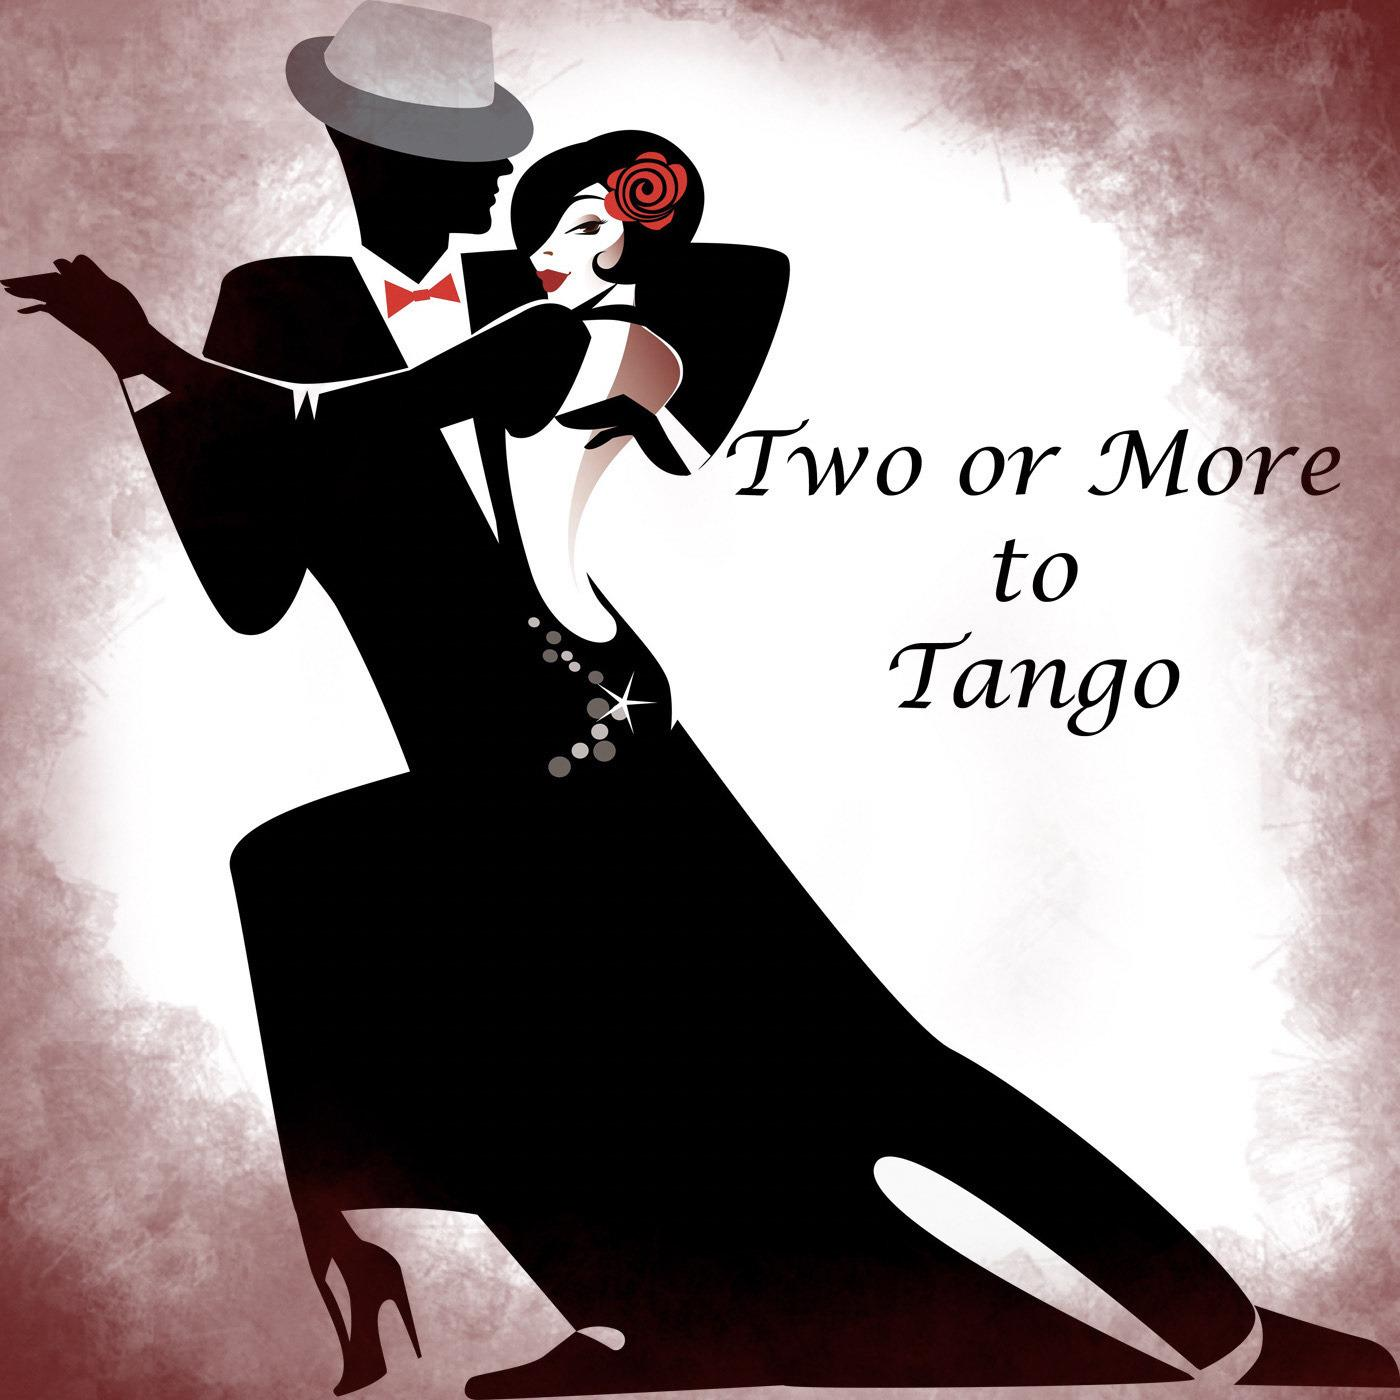 Two or More to Tango